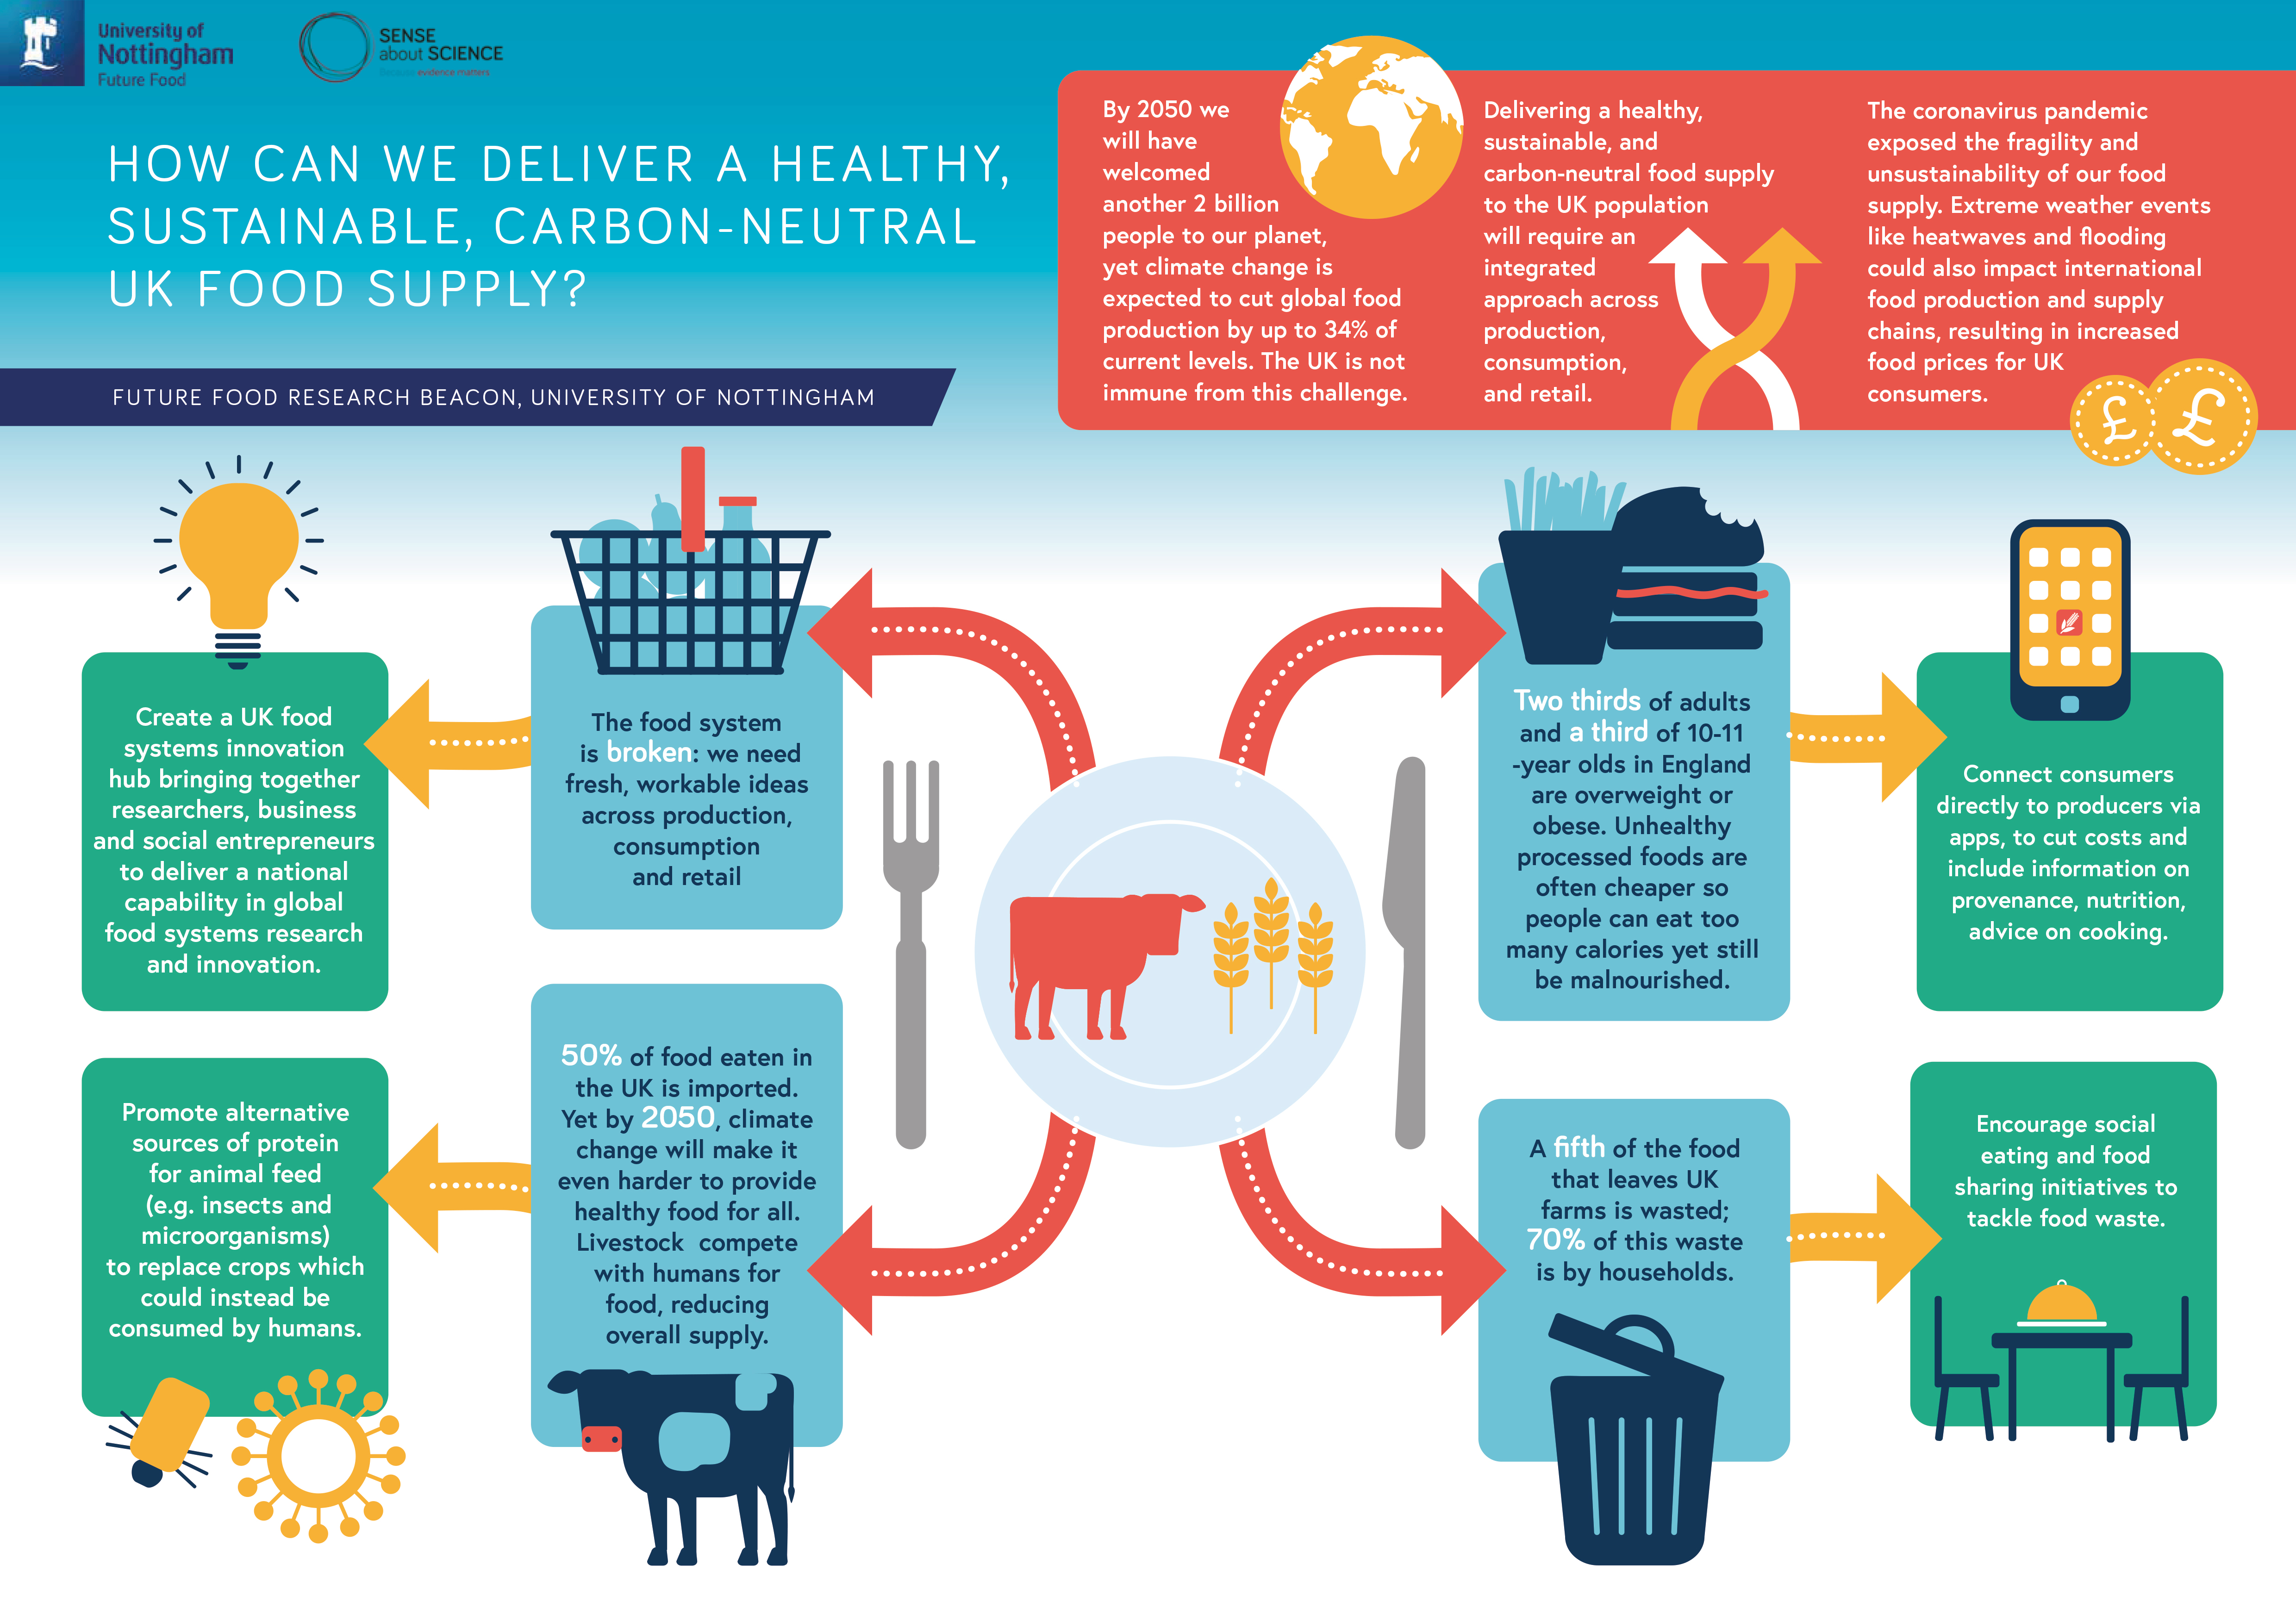 How can we deliver a healthy, sustainable, carbon-neutral UK food supply infographic